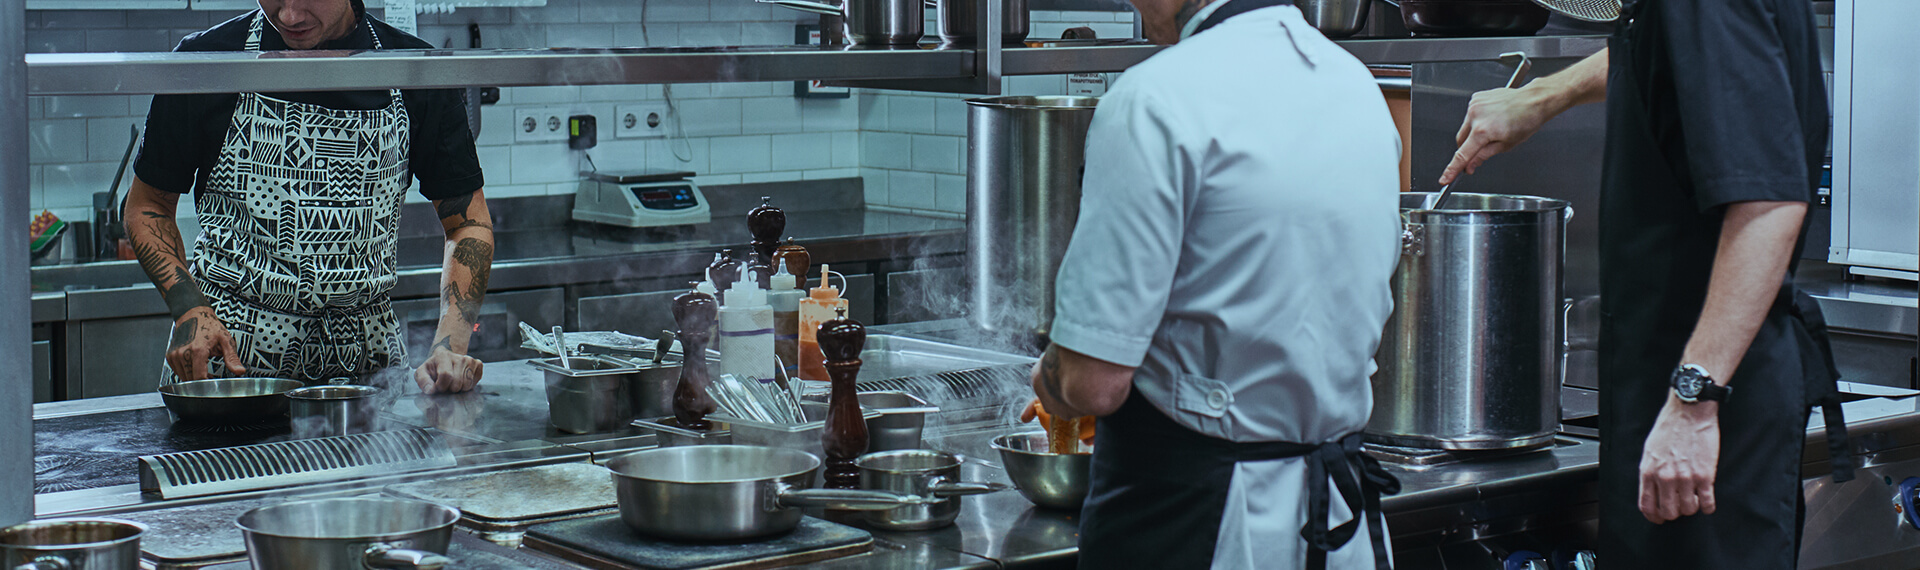 Image of people in a kitchen using an grease trap